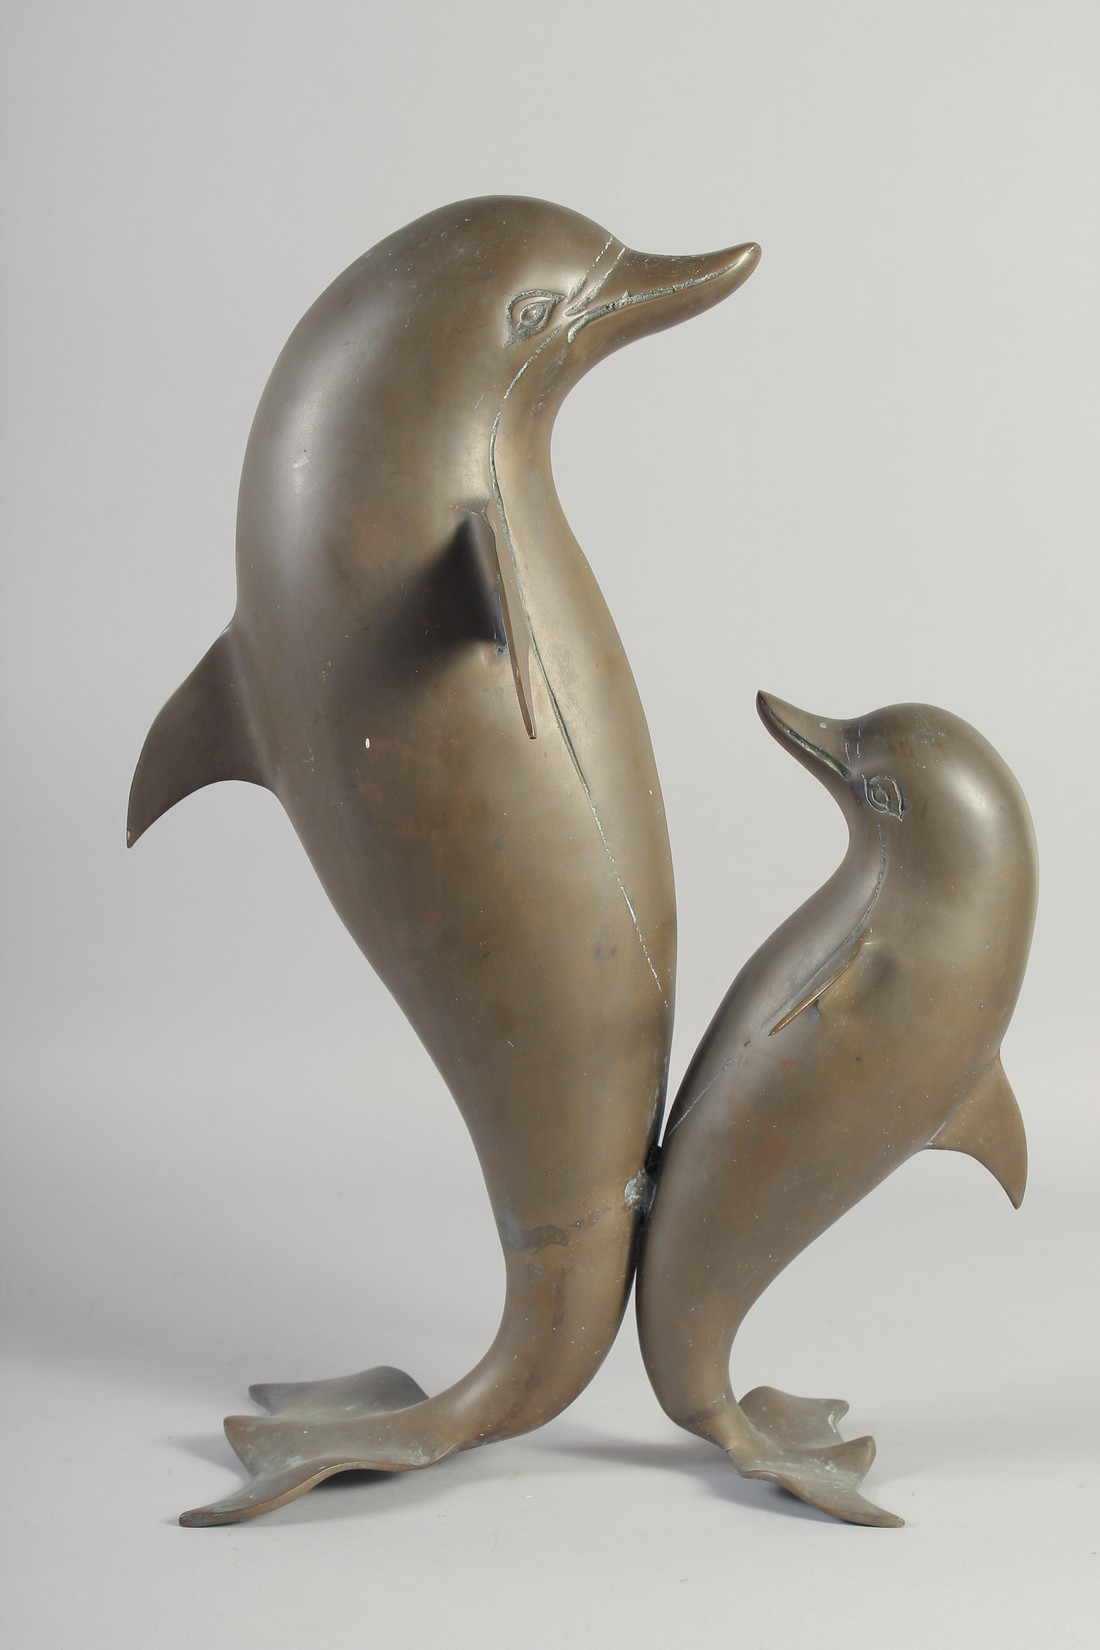 A MODERN ART BRONZE OF TWO DANCING DOLPHINS. 18ins high. - Image 2 of 2